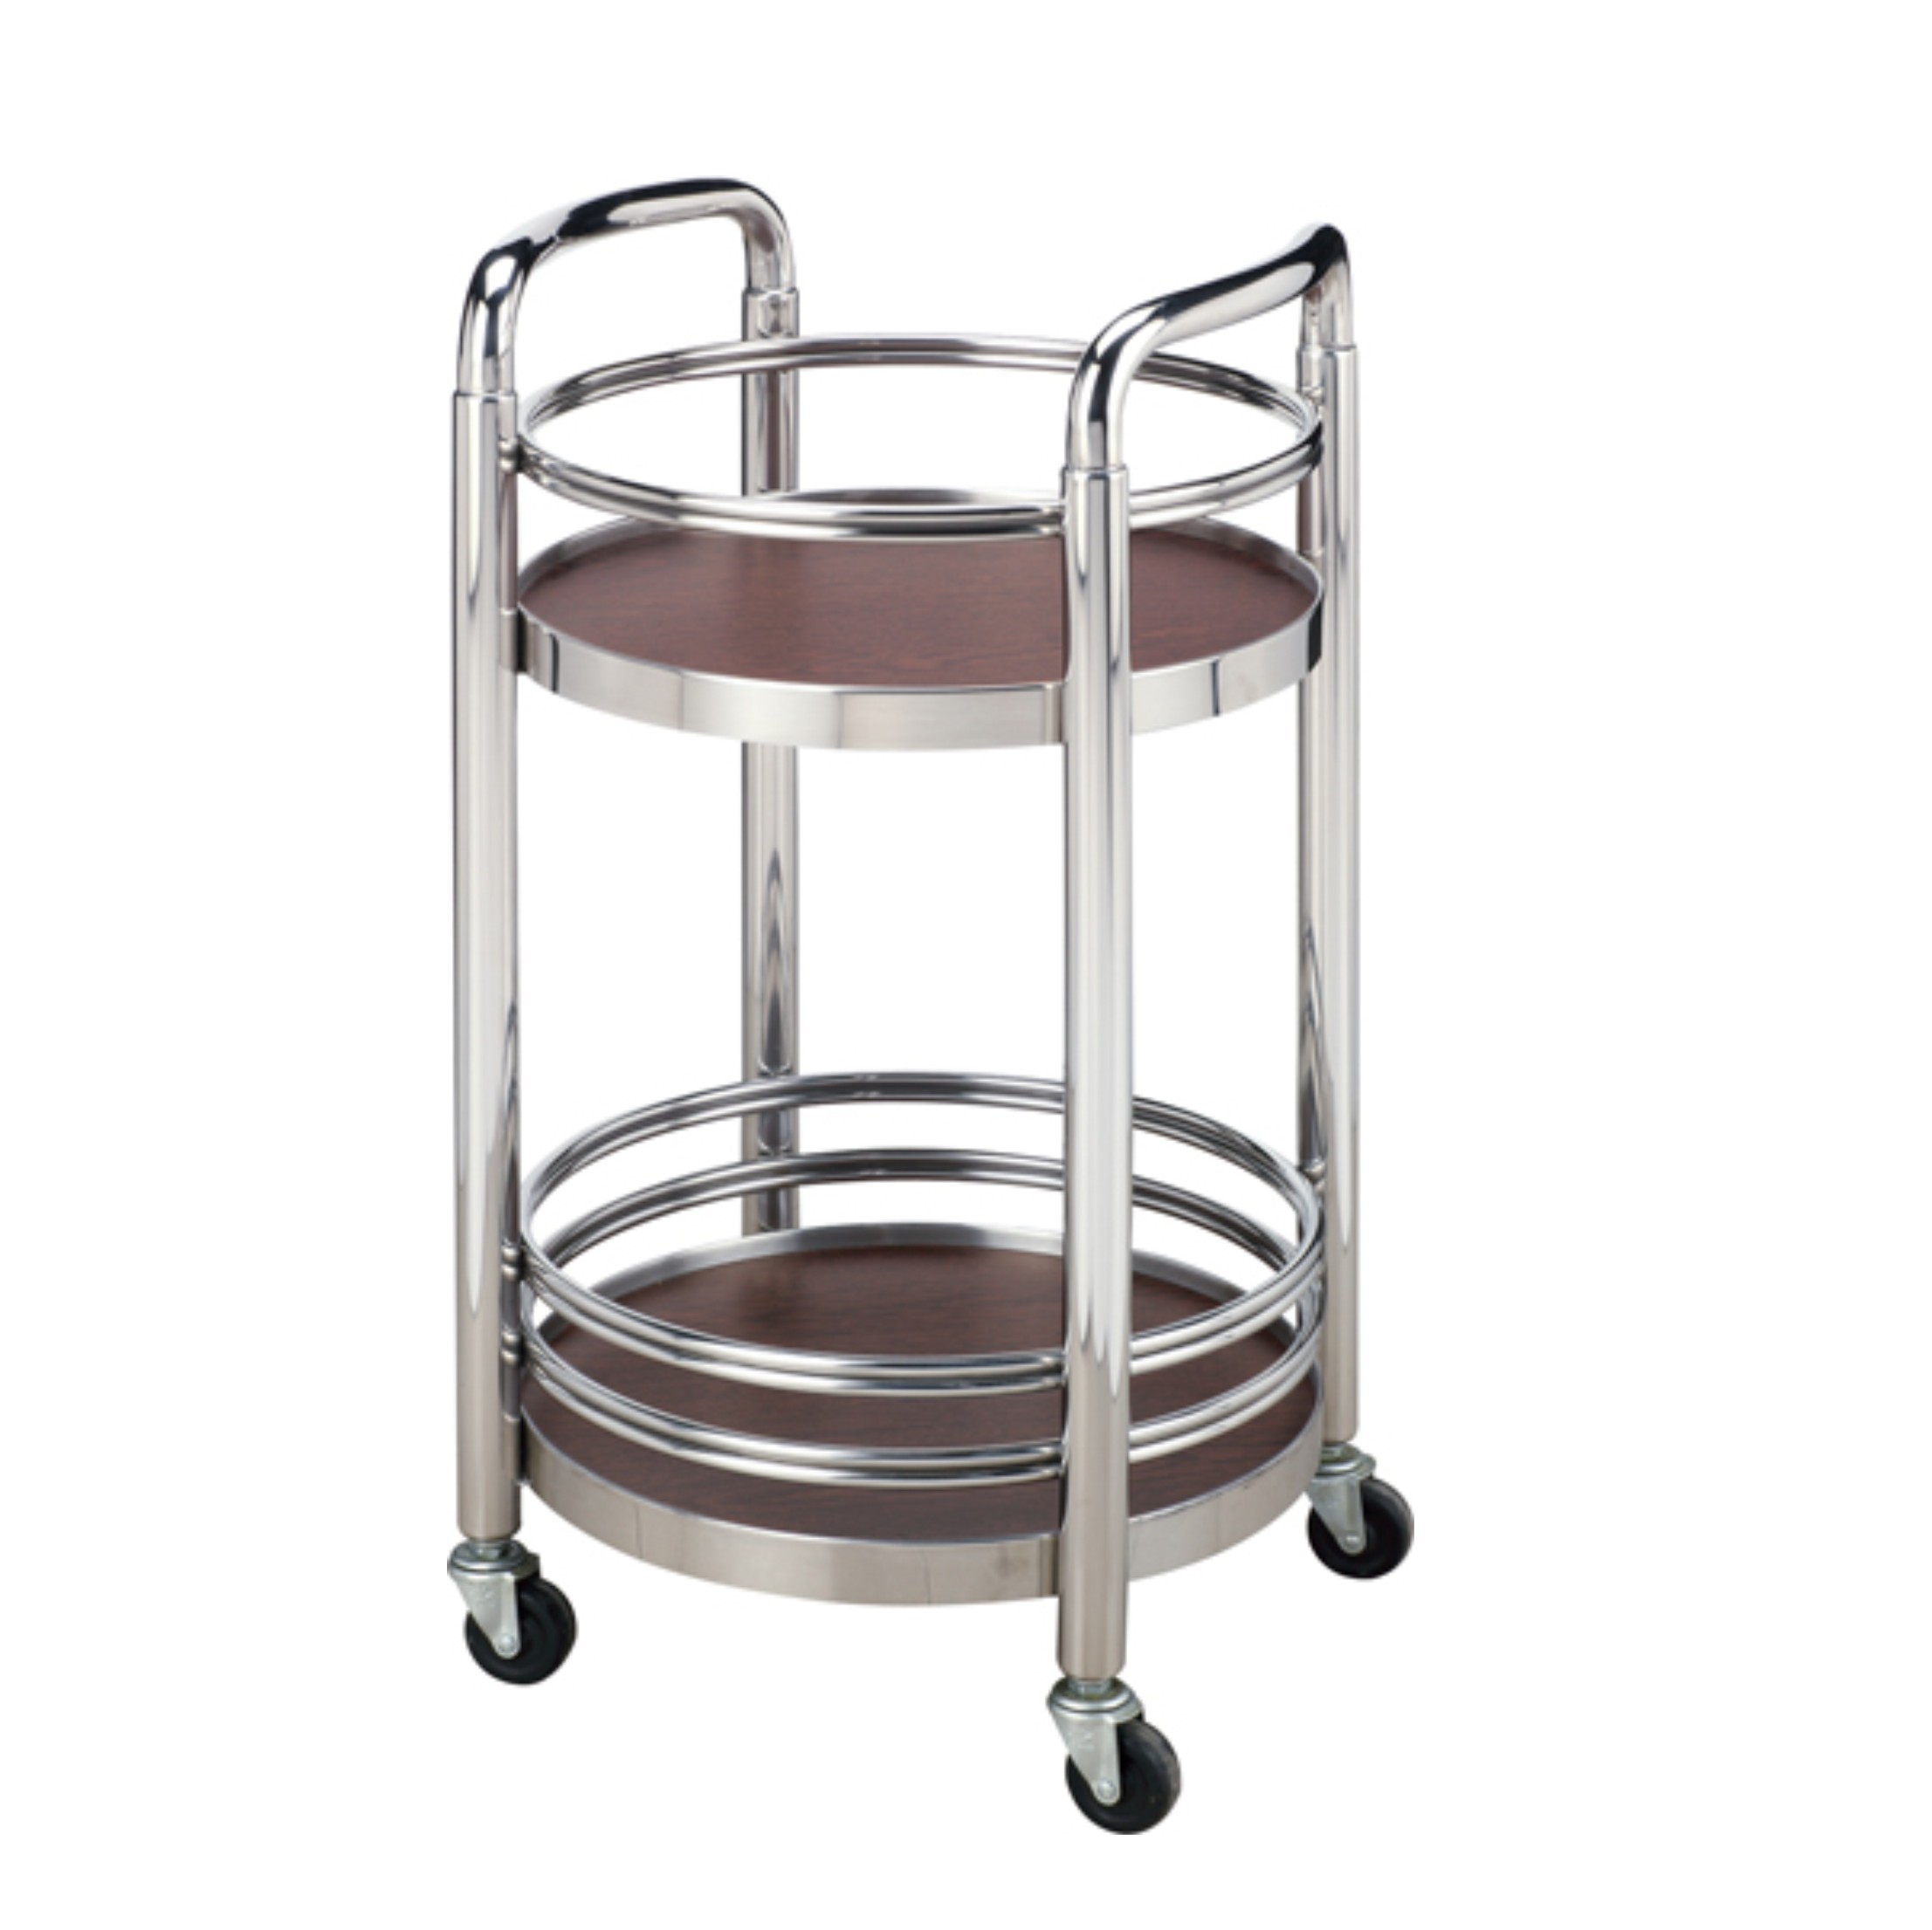 Round Two-Ties Stainless Steel Hotel Liquor Trolley (FW-101)